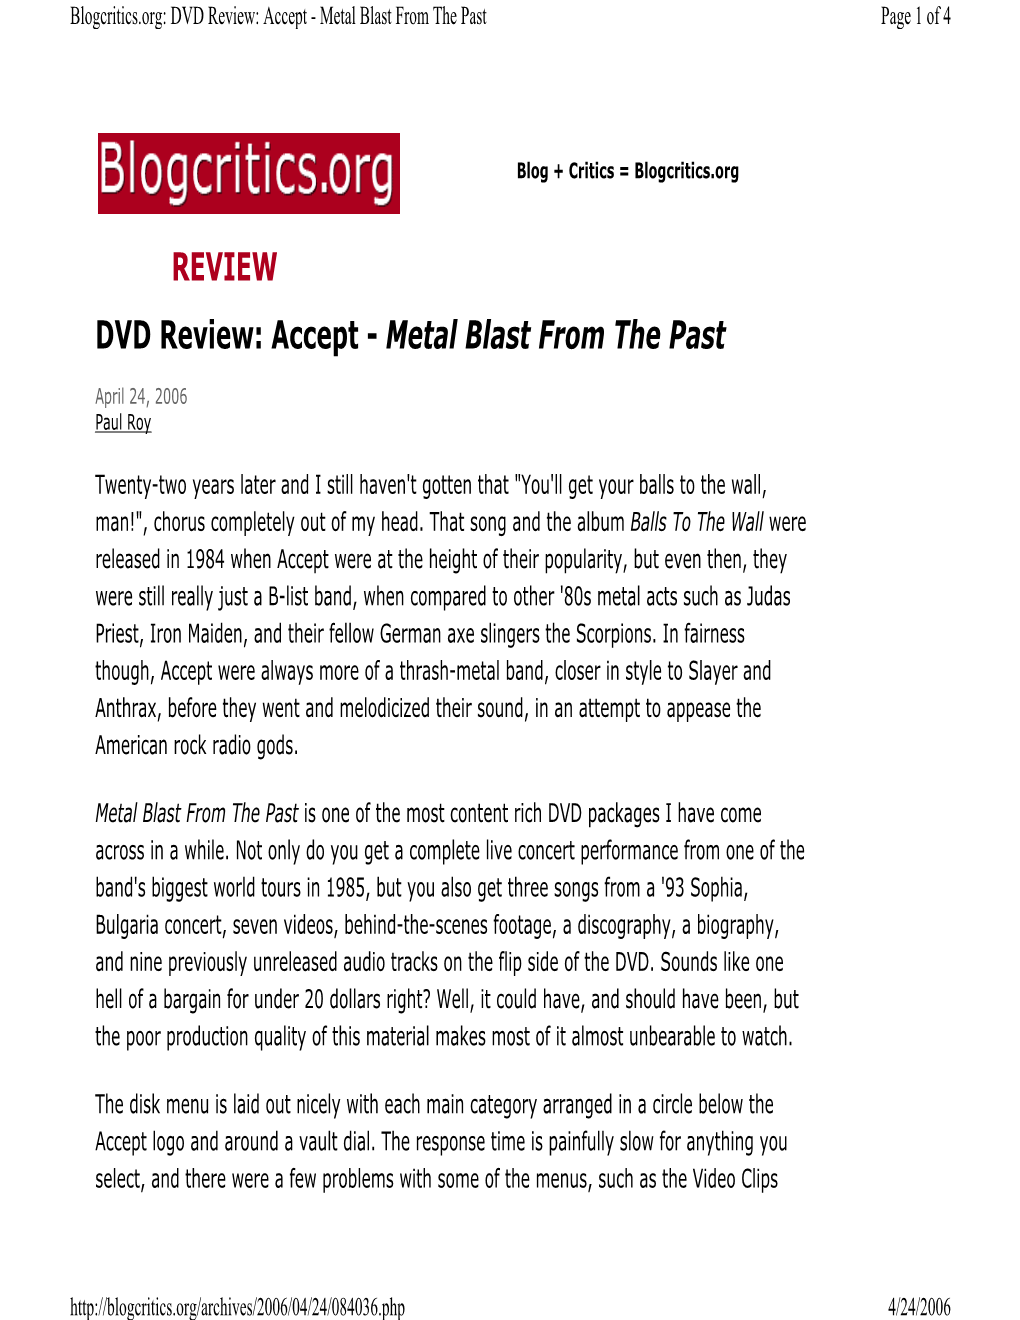 DVD Review: Accept - Metal Blast from the Past Page 1 of 4